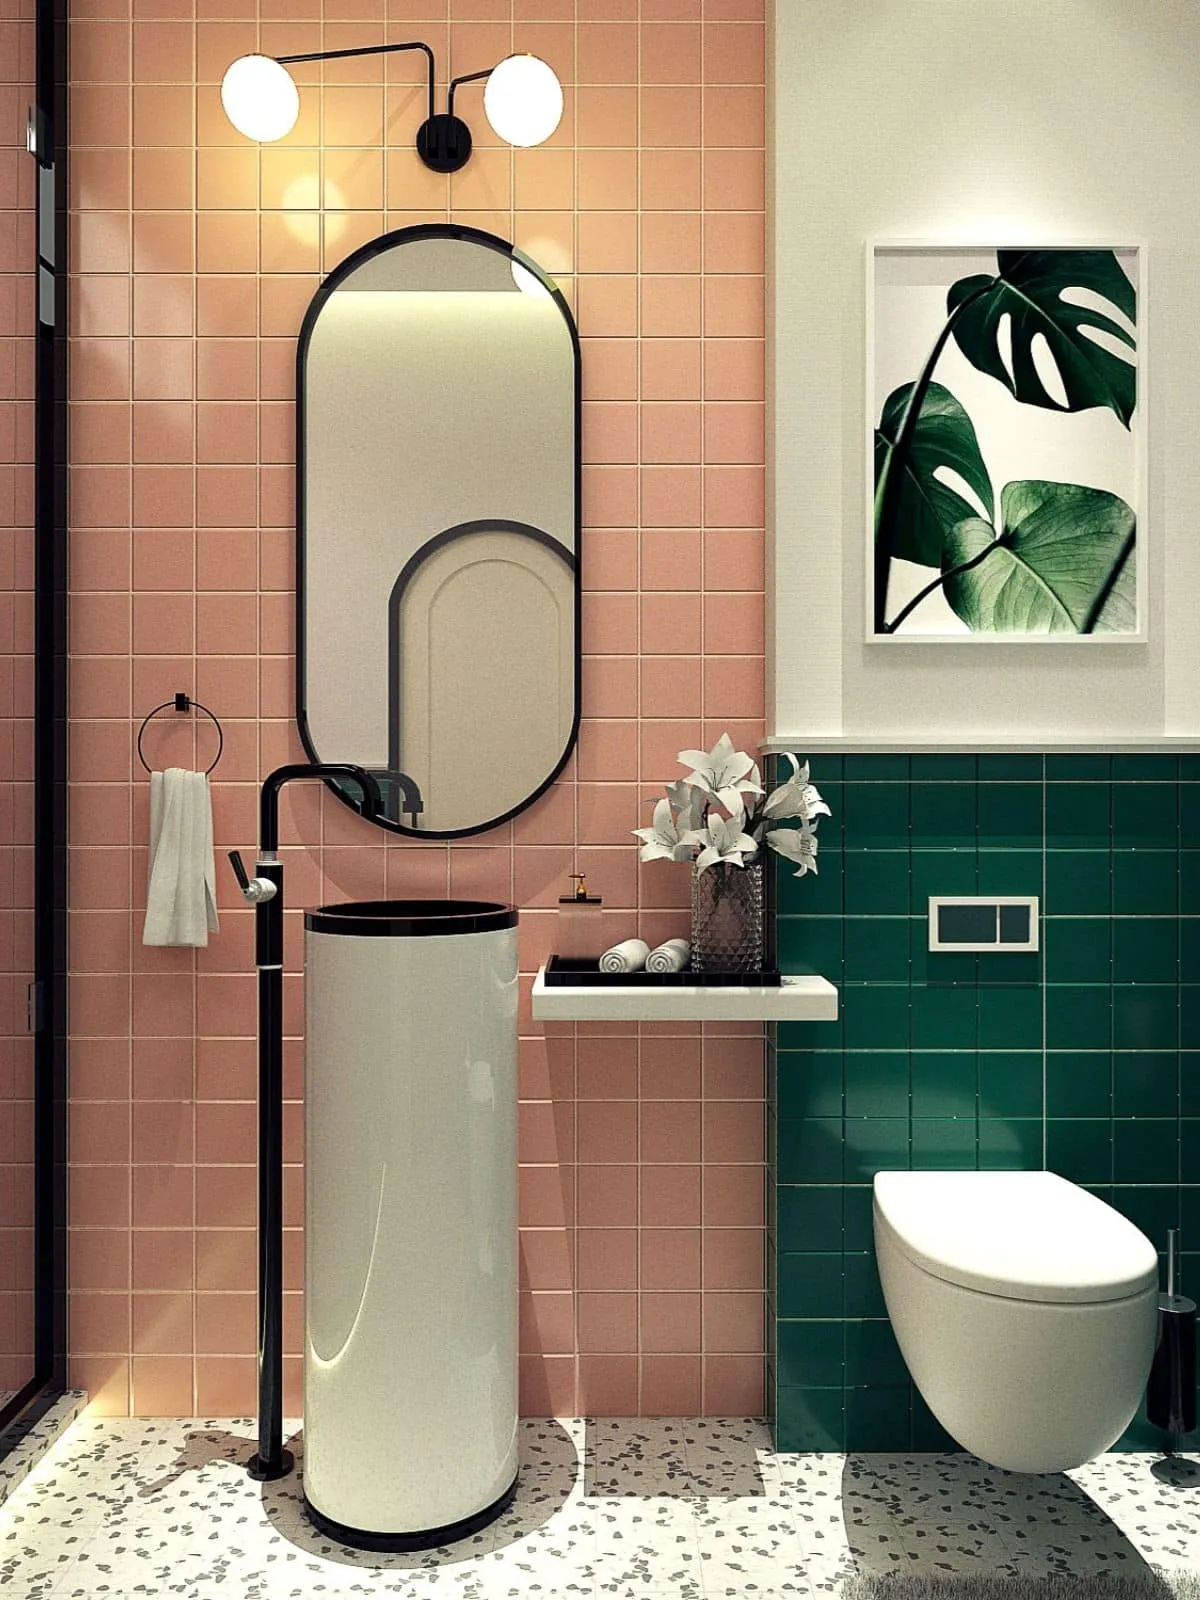 modern small bathroom idea, with mirror, wall sconce, floating water closet